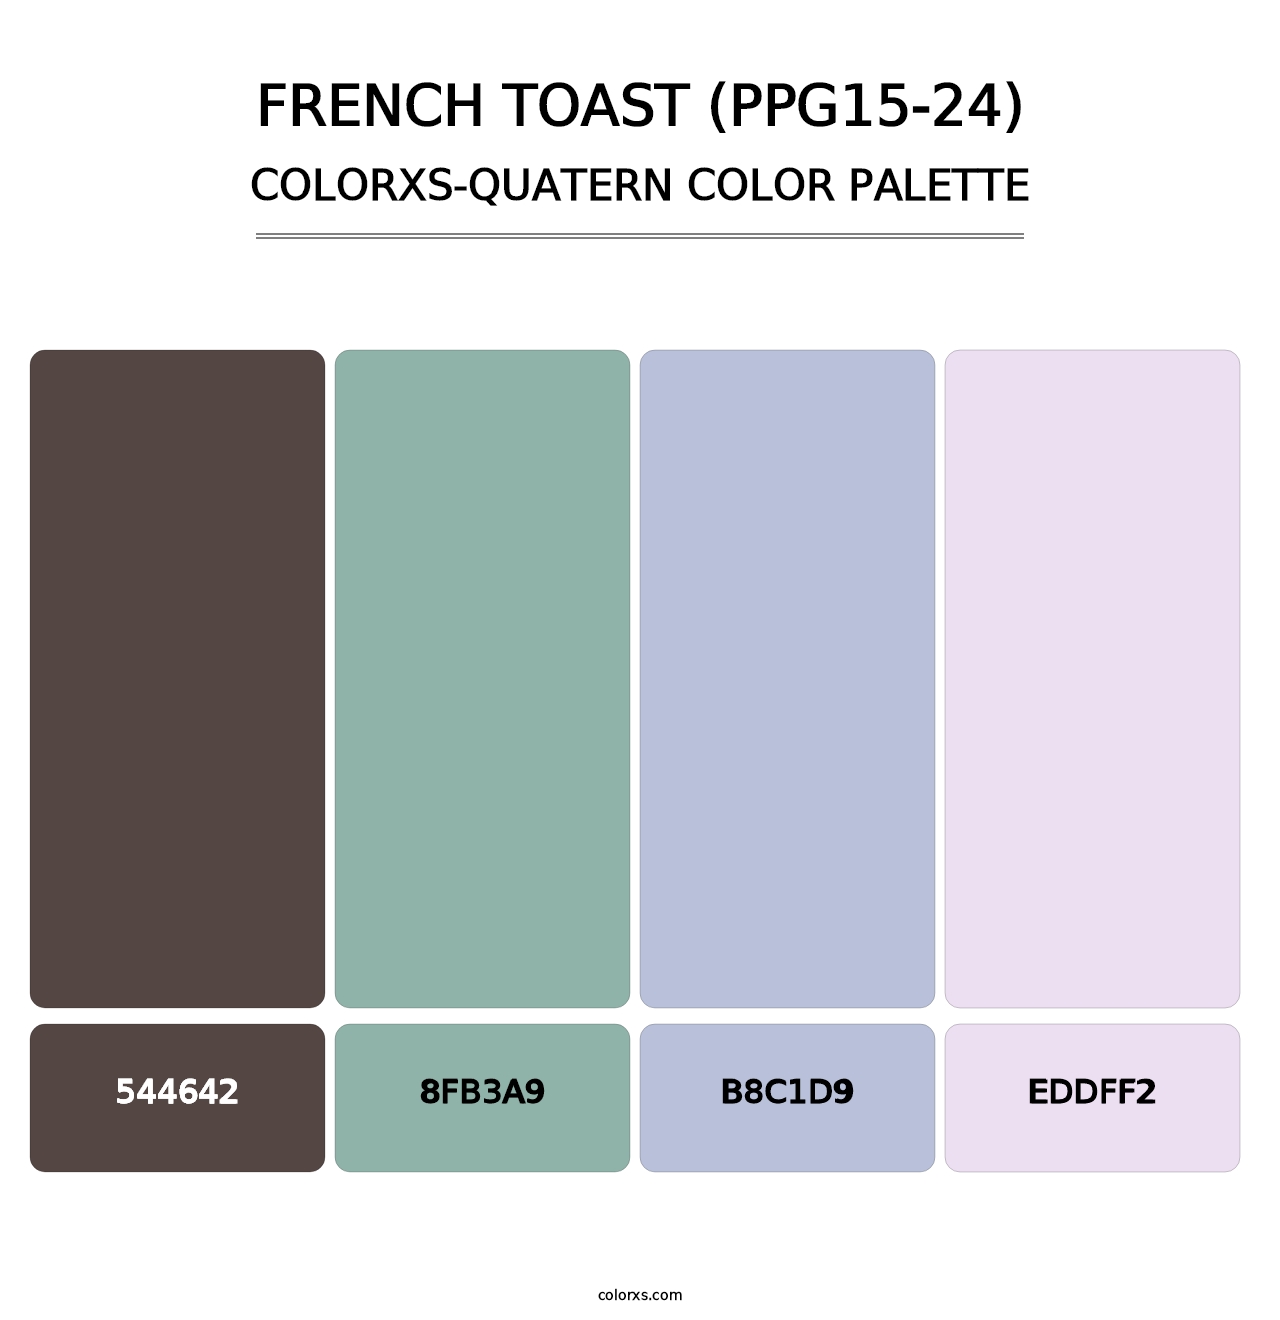 French Toast (PPG15-24) - Colorxs Quatern Palette